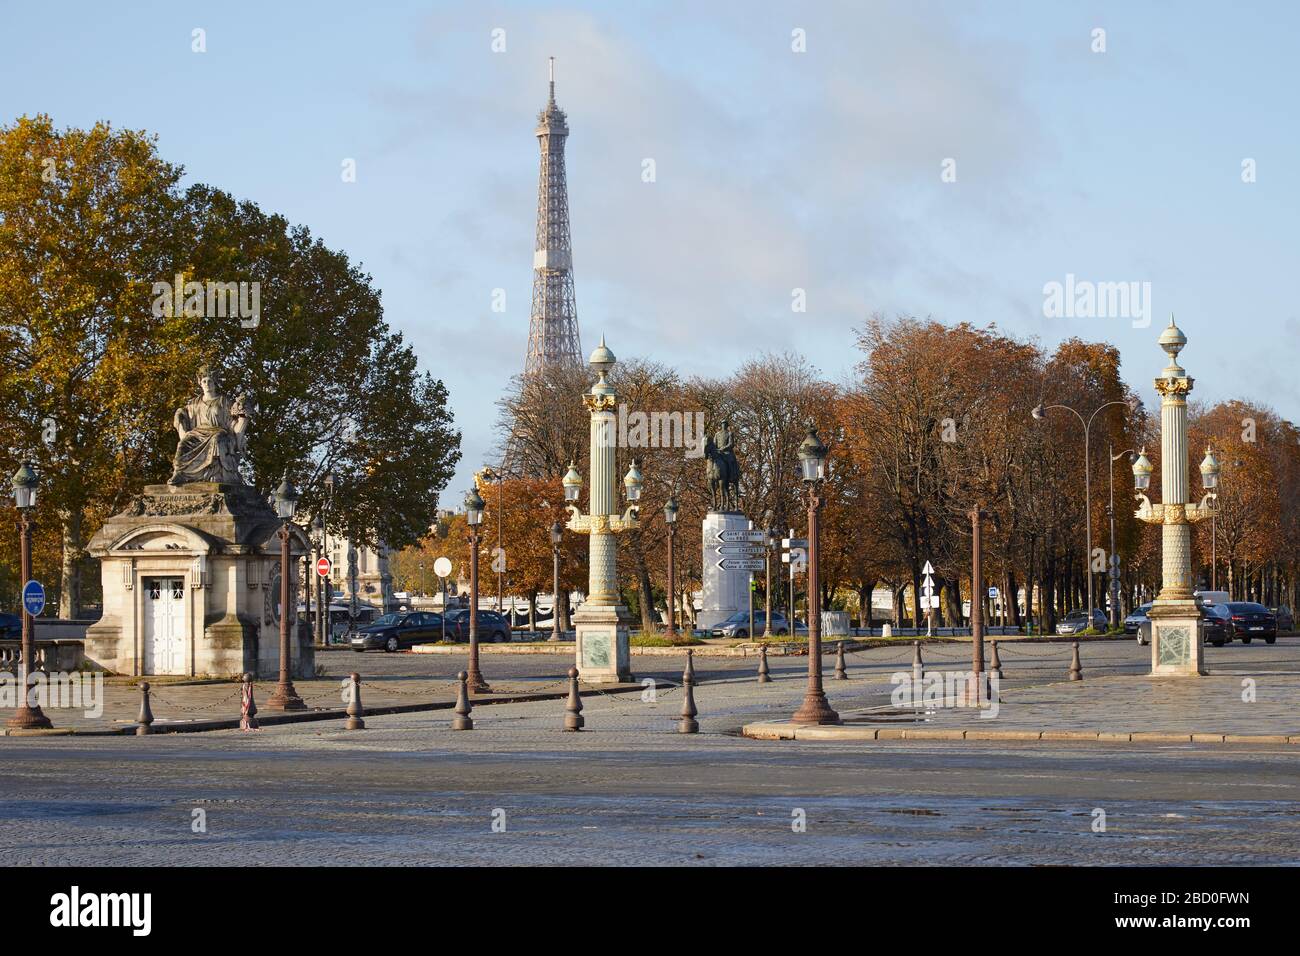 PARIS, FRANCE - NOVEMBER 7, 2019: Place de la Concorde with golden and green street lamps and Eiffel tower view in a sunny autumn day in Paris Stock Photo